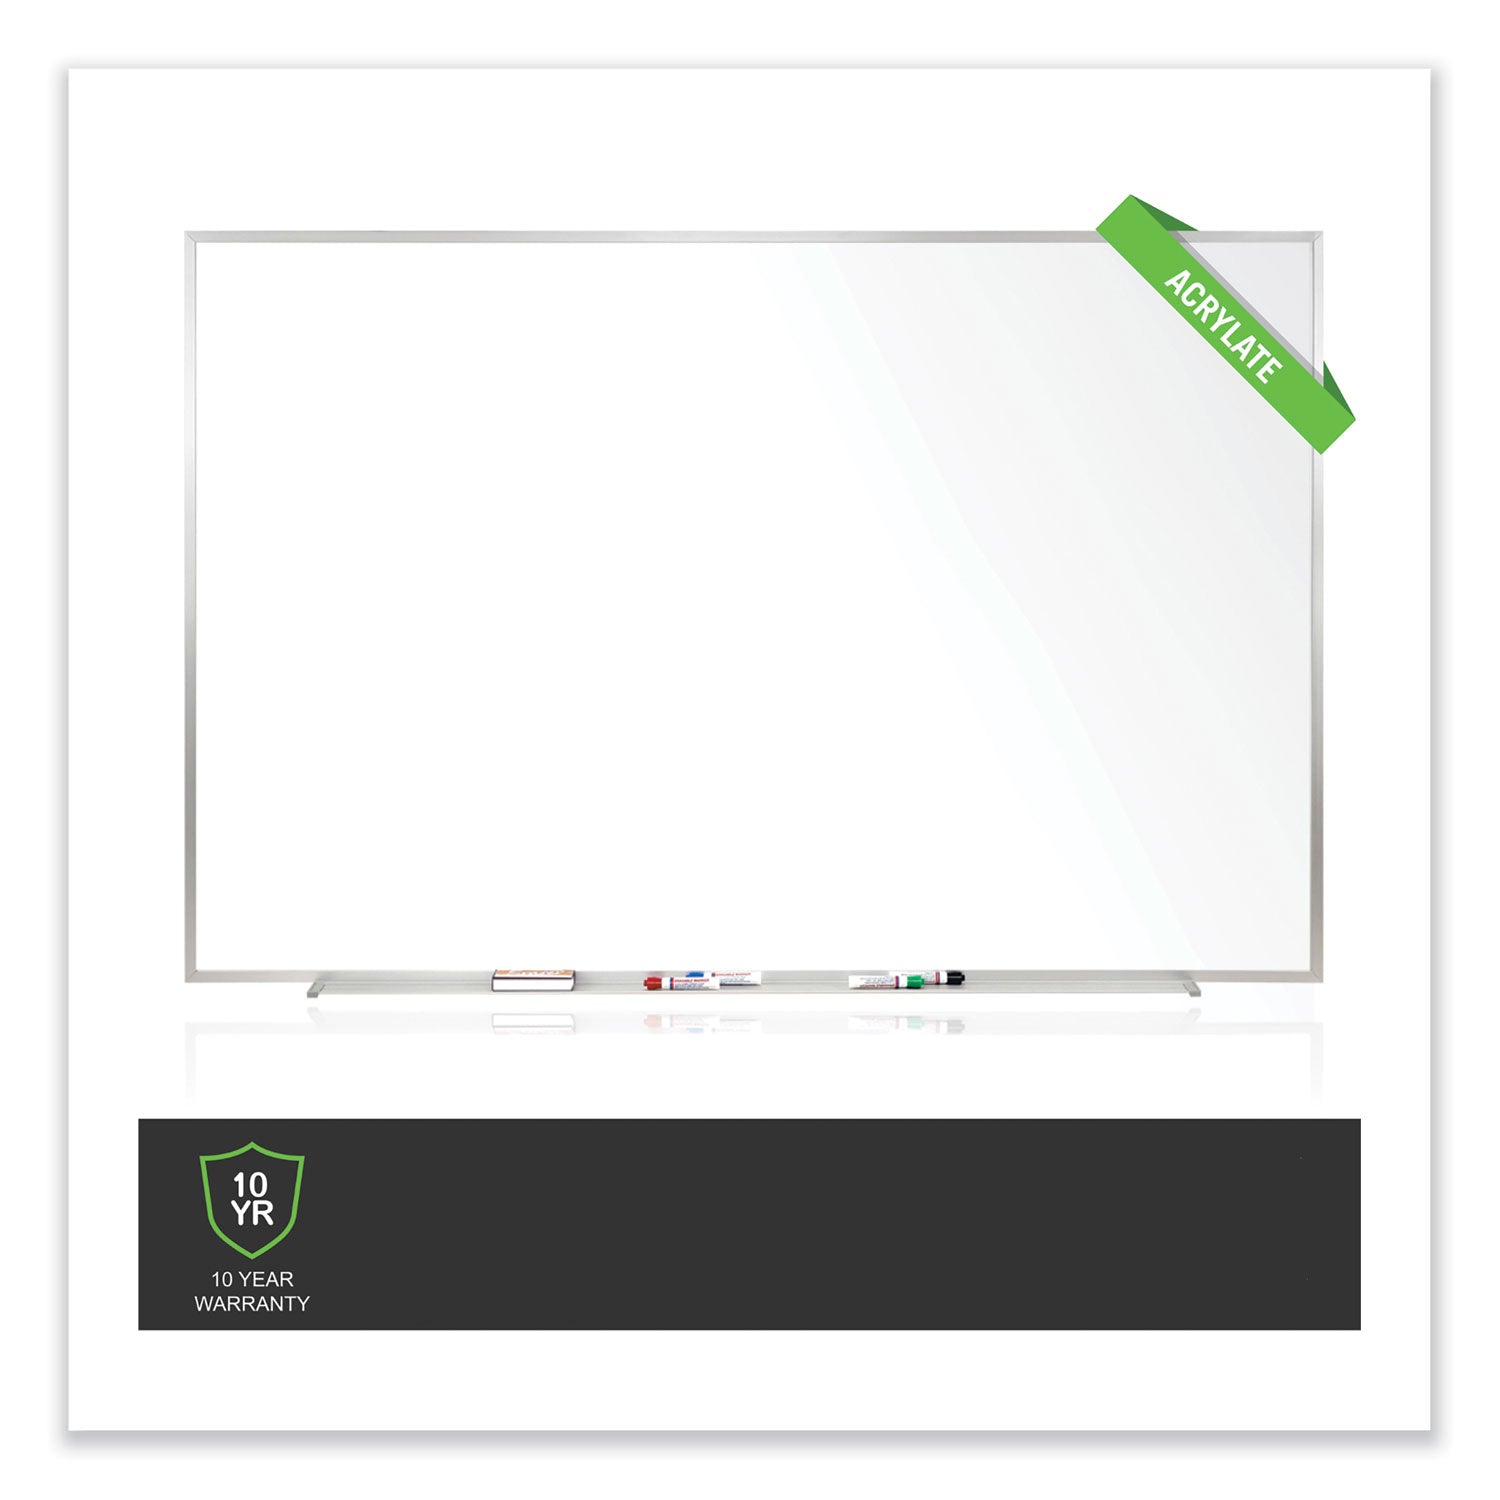 non-magnetic-whiteboard-with-aluminum-frame-4863-x-4847-white-surface-satin-aluminum-frame-ships-in-7-10-business-days_ghem2444 - 4